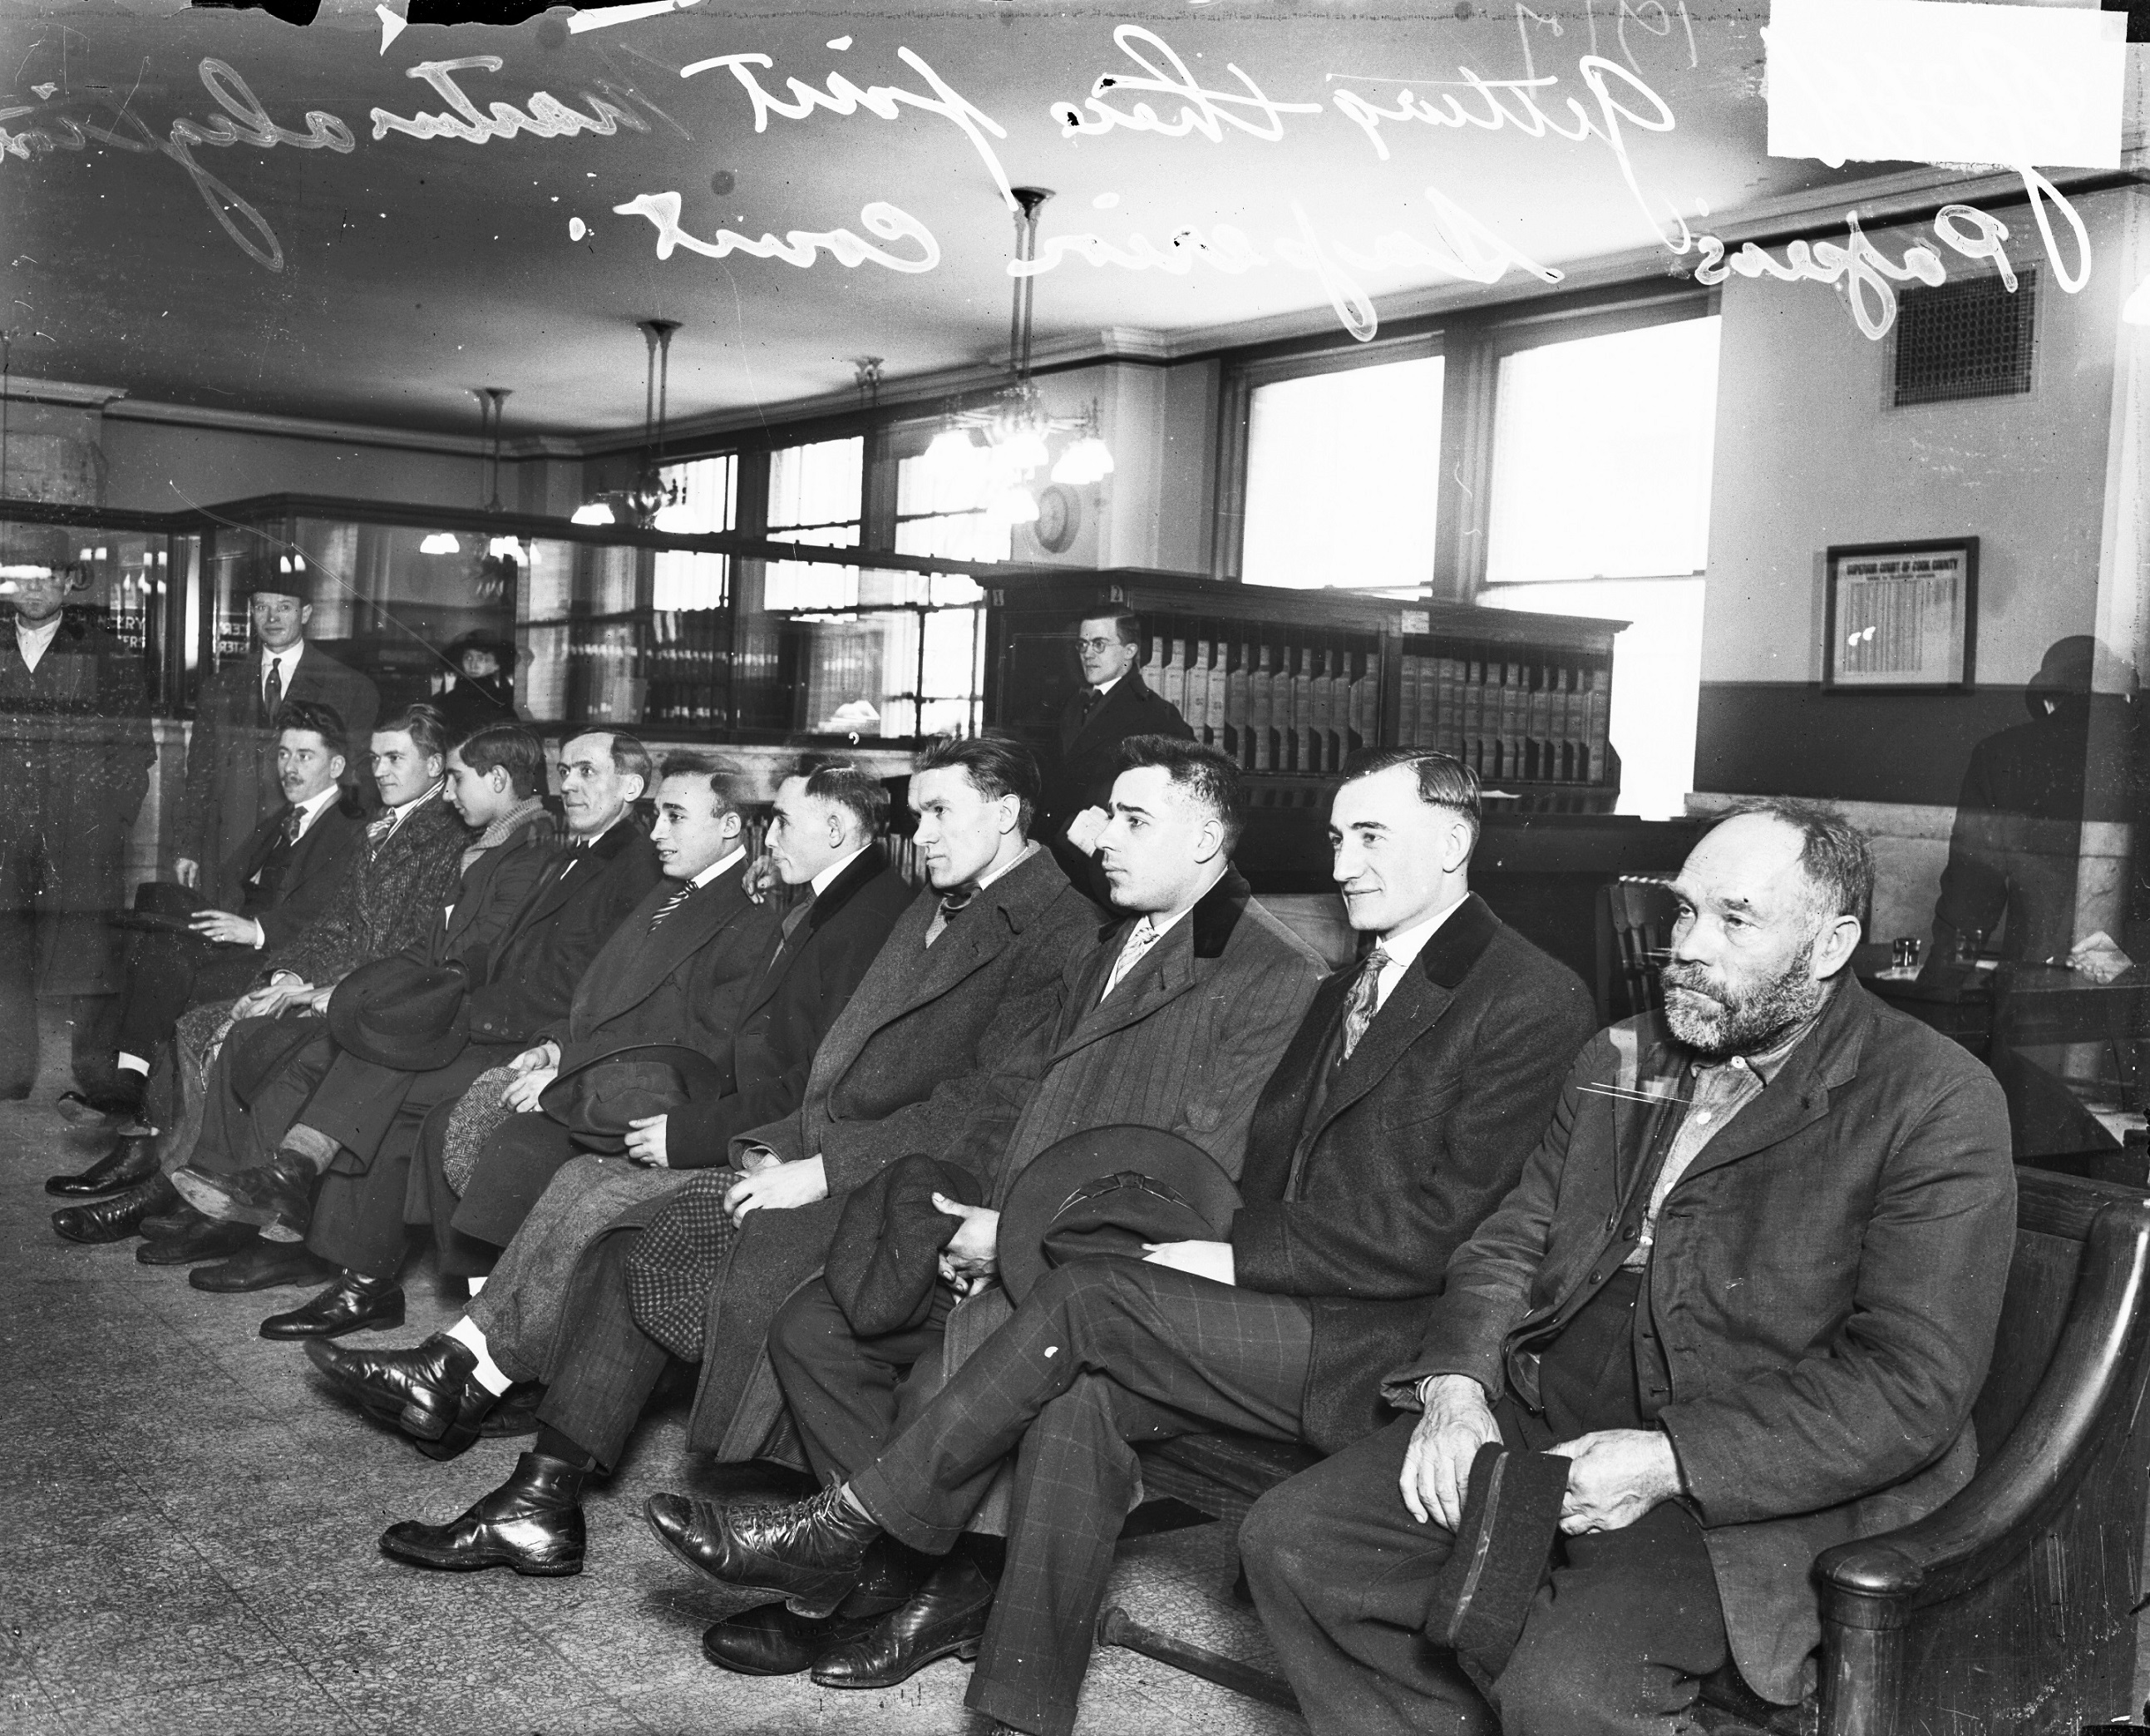 Group portrait of ten immigrant men sitting in a row in the Superior Court on the 4th Floor of the County Building at 118 North Clark Street in the Loop community area of Chicago, Illinois. Text on the image reads getting their first naturalization papers, Superior Court.